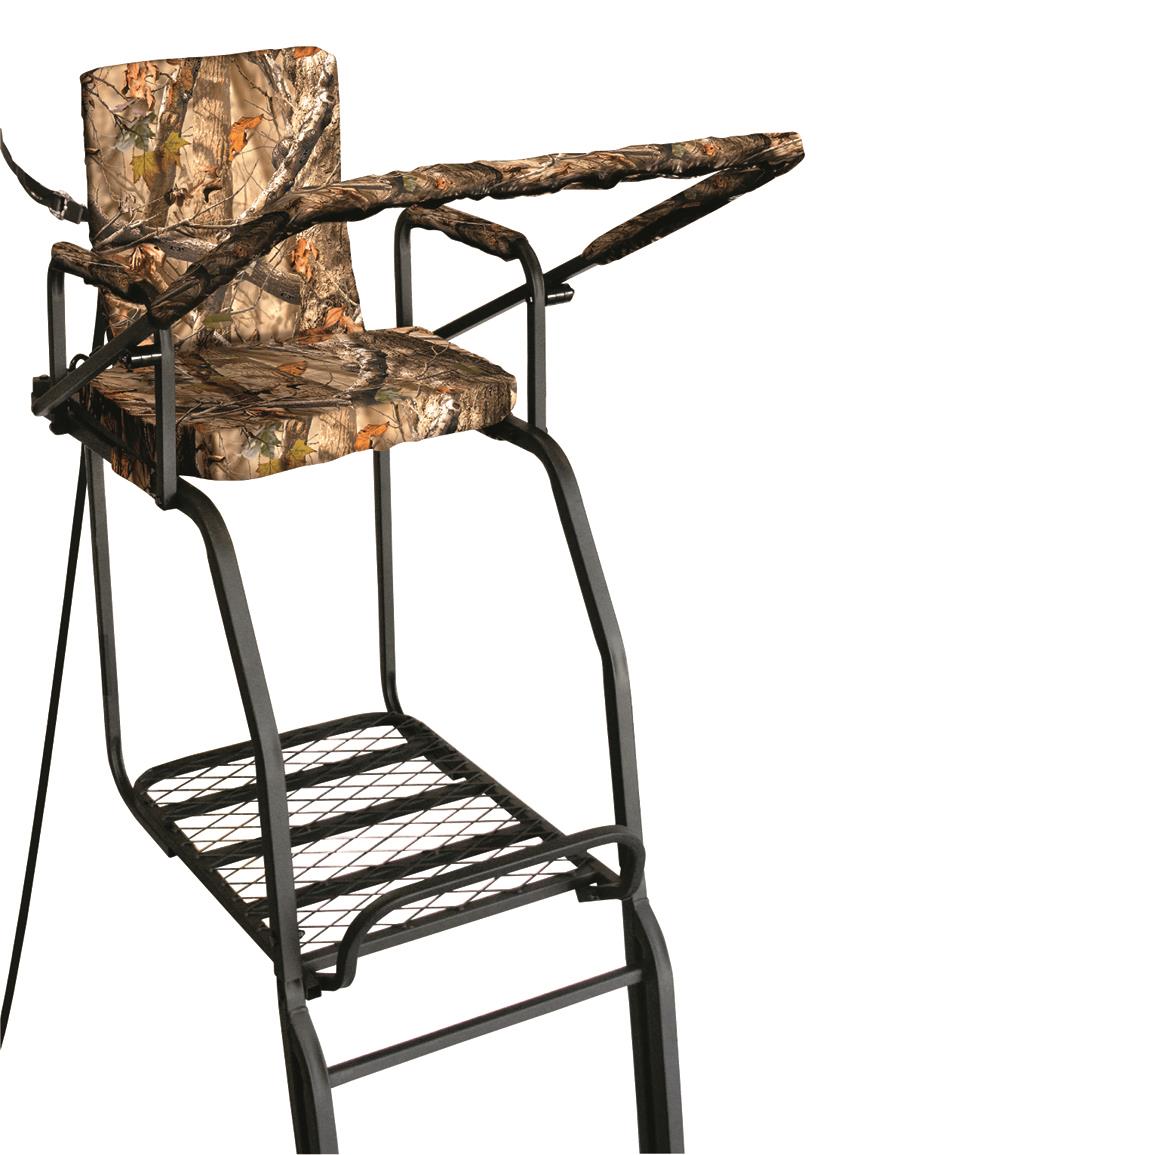 Guide Gear 15 Mesh Seat Ladder Tree Stand